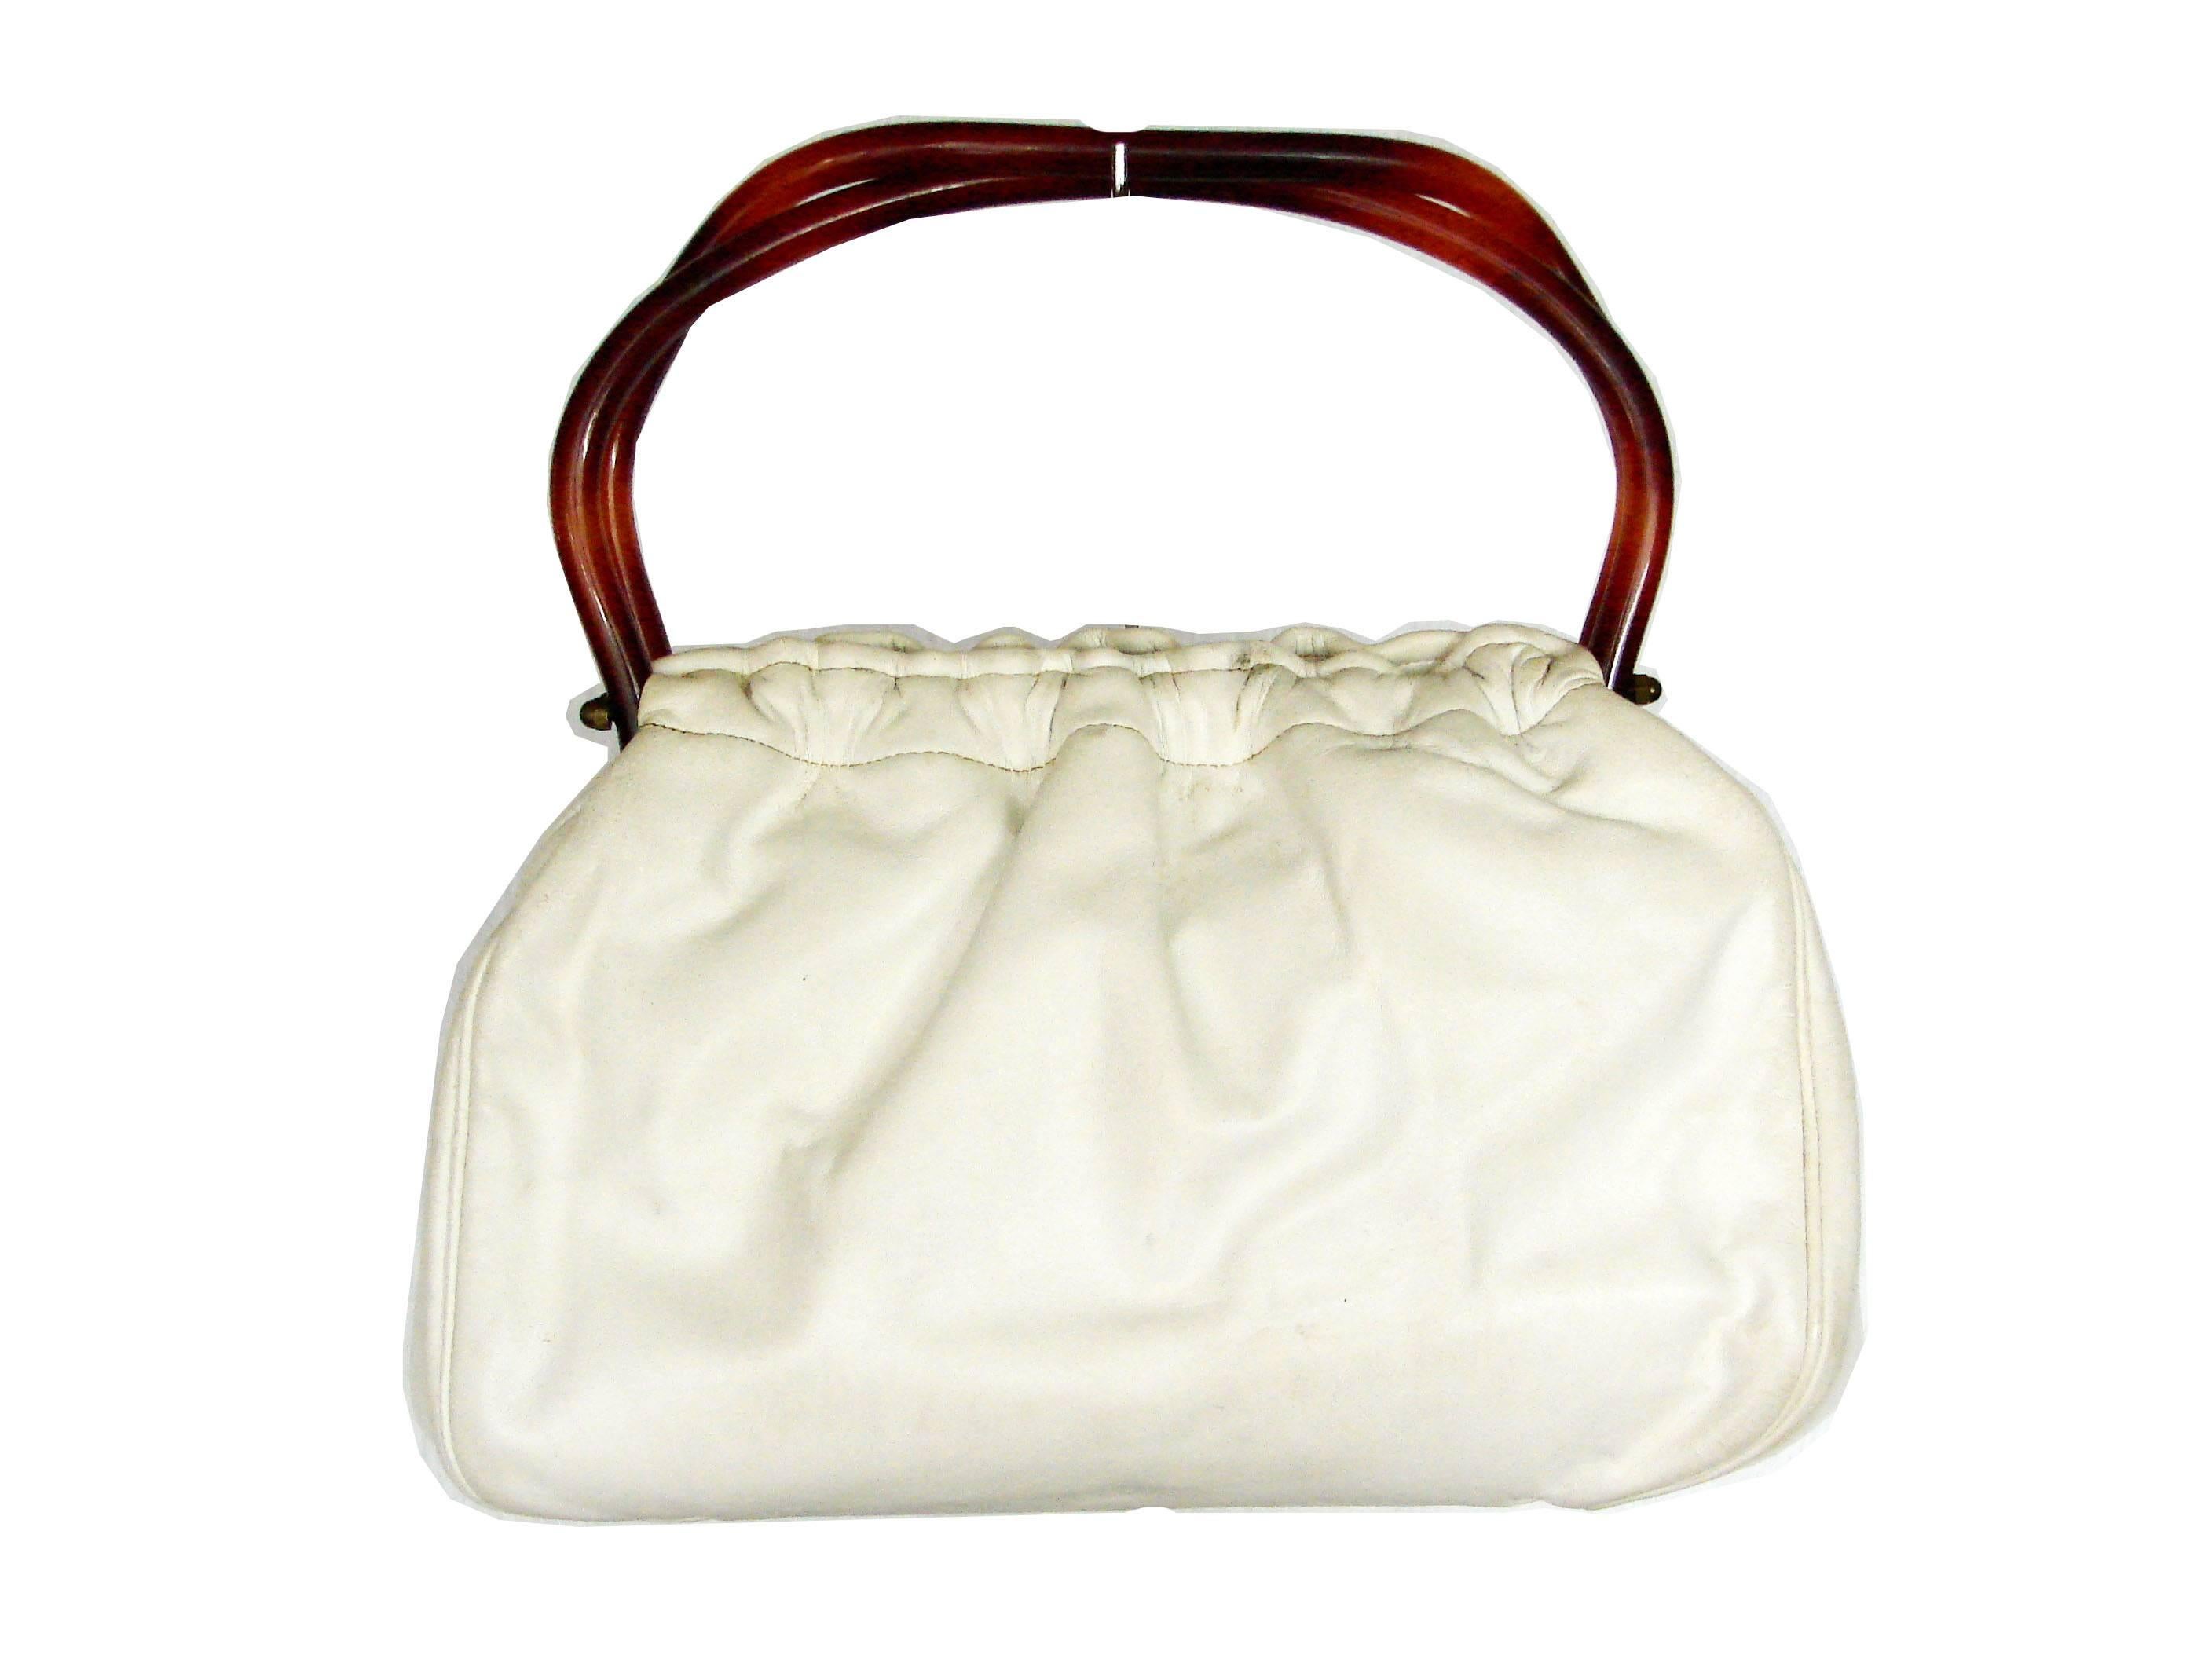 Here's a cool leather handbag from Morris Moskowitz, made in the 1960s.  Fully lined in fabric, it features one small zip pocket.  In very good condition overall, we note several rubs to the white leather, and darkening to the leather from the brass